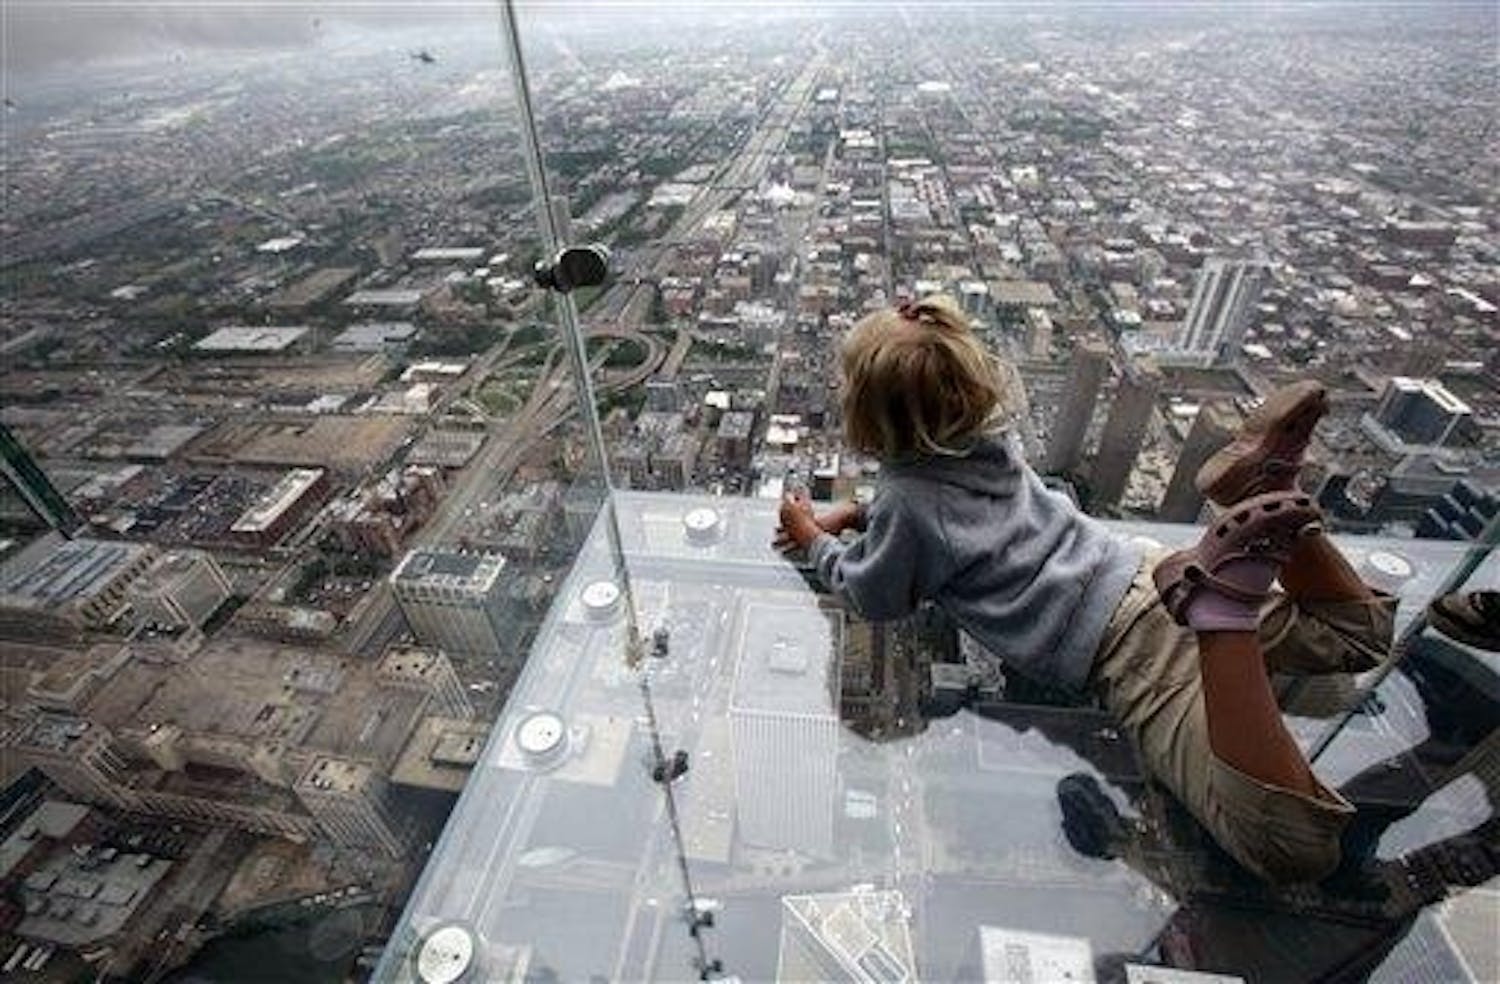 Anna Kane, 5, of Alton, Ill. looks down from "The Ledge," the new glass balconies suspended 1,353 feet (412 meters) in the air and jut out 4 feet (1.22 meters) from the Sears Tower's 103rd floor Skydeck Wednesday, July 1, 2009 in Chicago. The Ledge will open to public on Thursday.